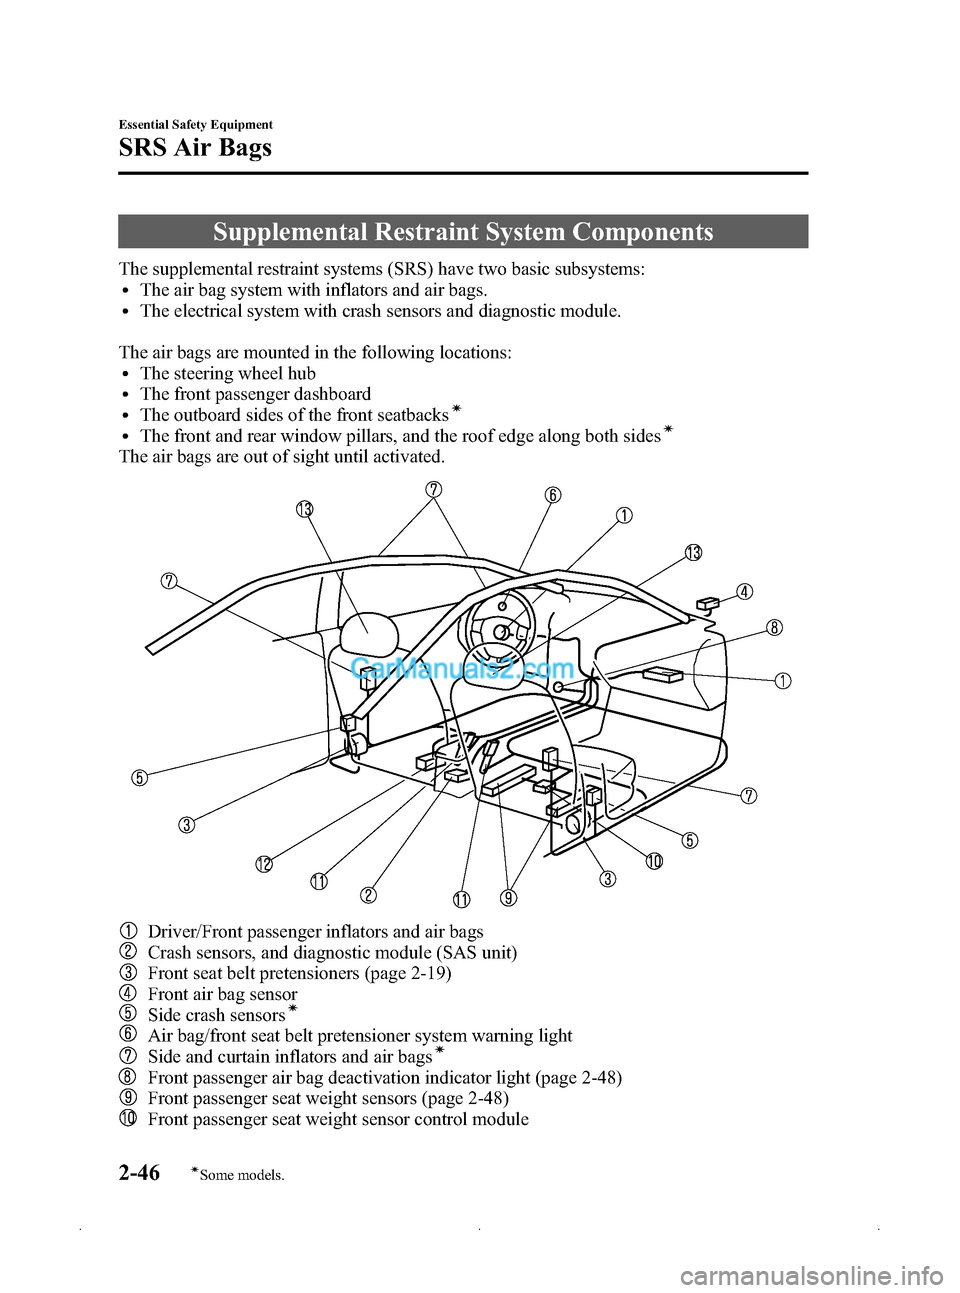 MAZDA MODEL MAZDASPEED 3 2009   (in English) Workshop Manual Black plate (60,1)
Supplemental Restraint System Components
The supplemental restraint systems (SRS) have two basic subsystems:lThe air bag system with inflators and air bags.lThe electrical system wi